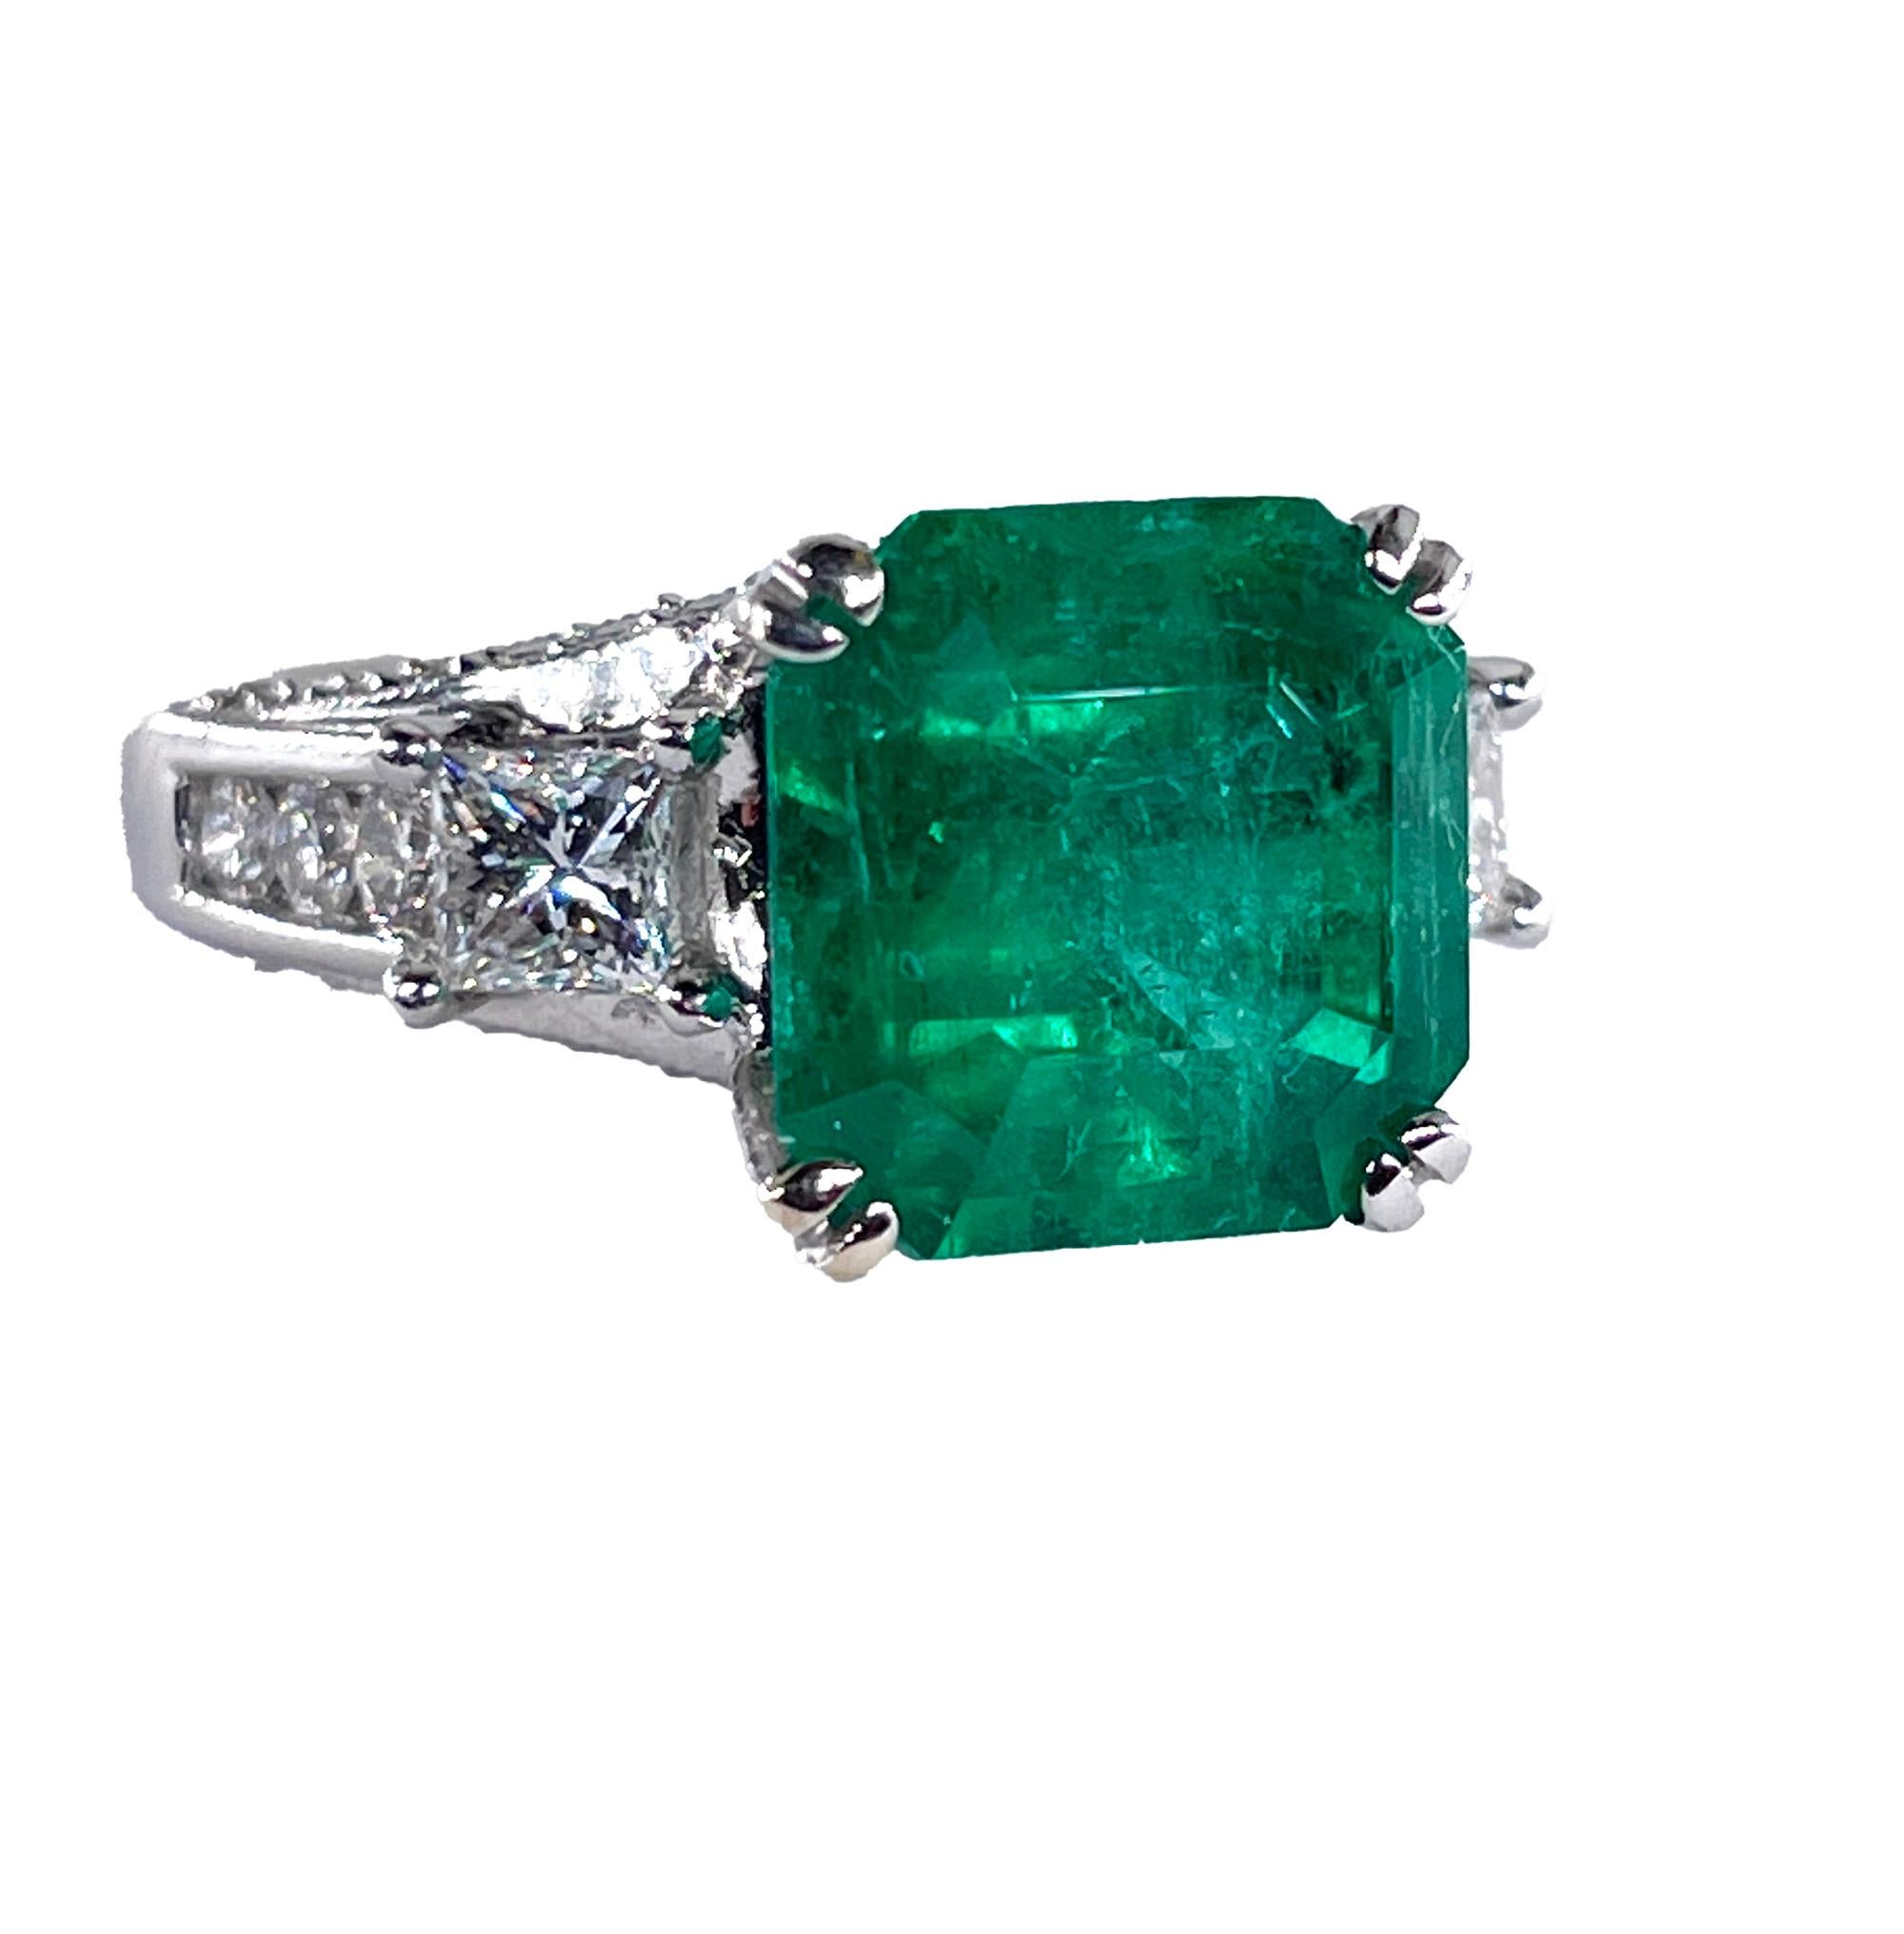 Incredible Gem and Phenomenal deal! GIA 7.00ct  Estate Vintage Emerald Diamond Engagement Wedding 18K White Gold Ring.

Gorgeous Vintage European made 18K White gold (stamped 750- European for 18K and 18K) Green Emerald and Diamond Ring. This Fine